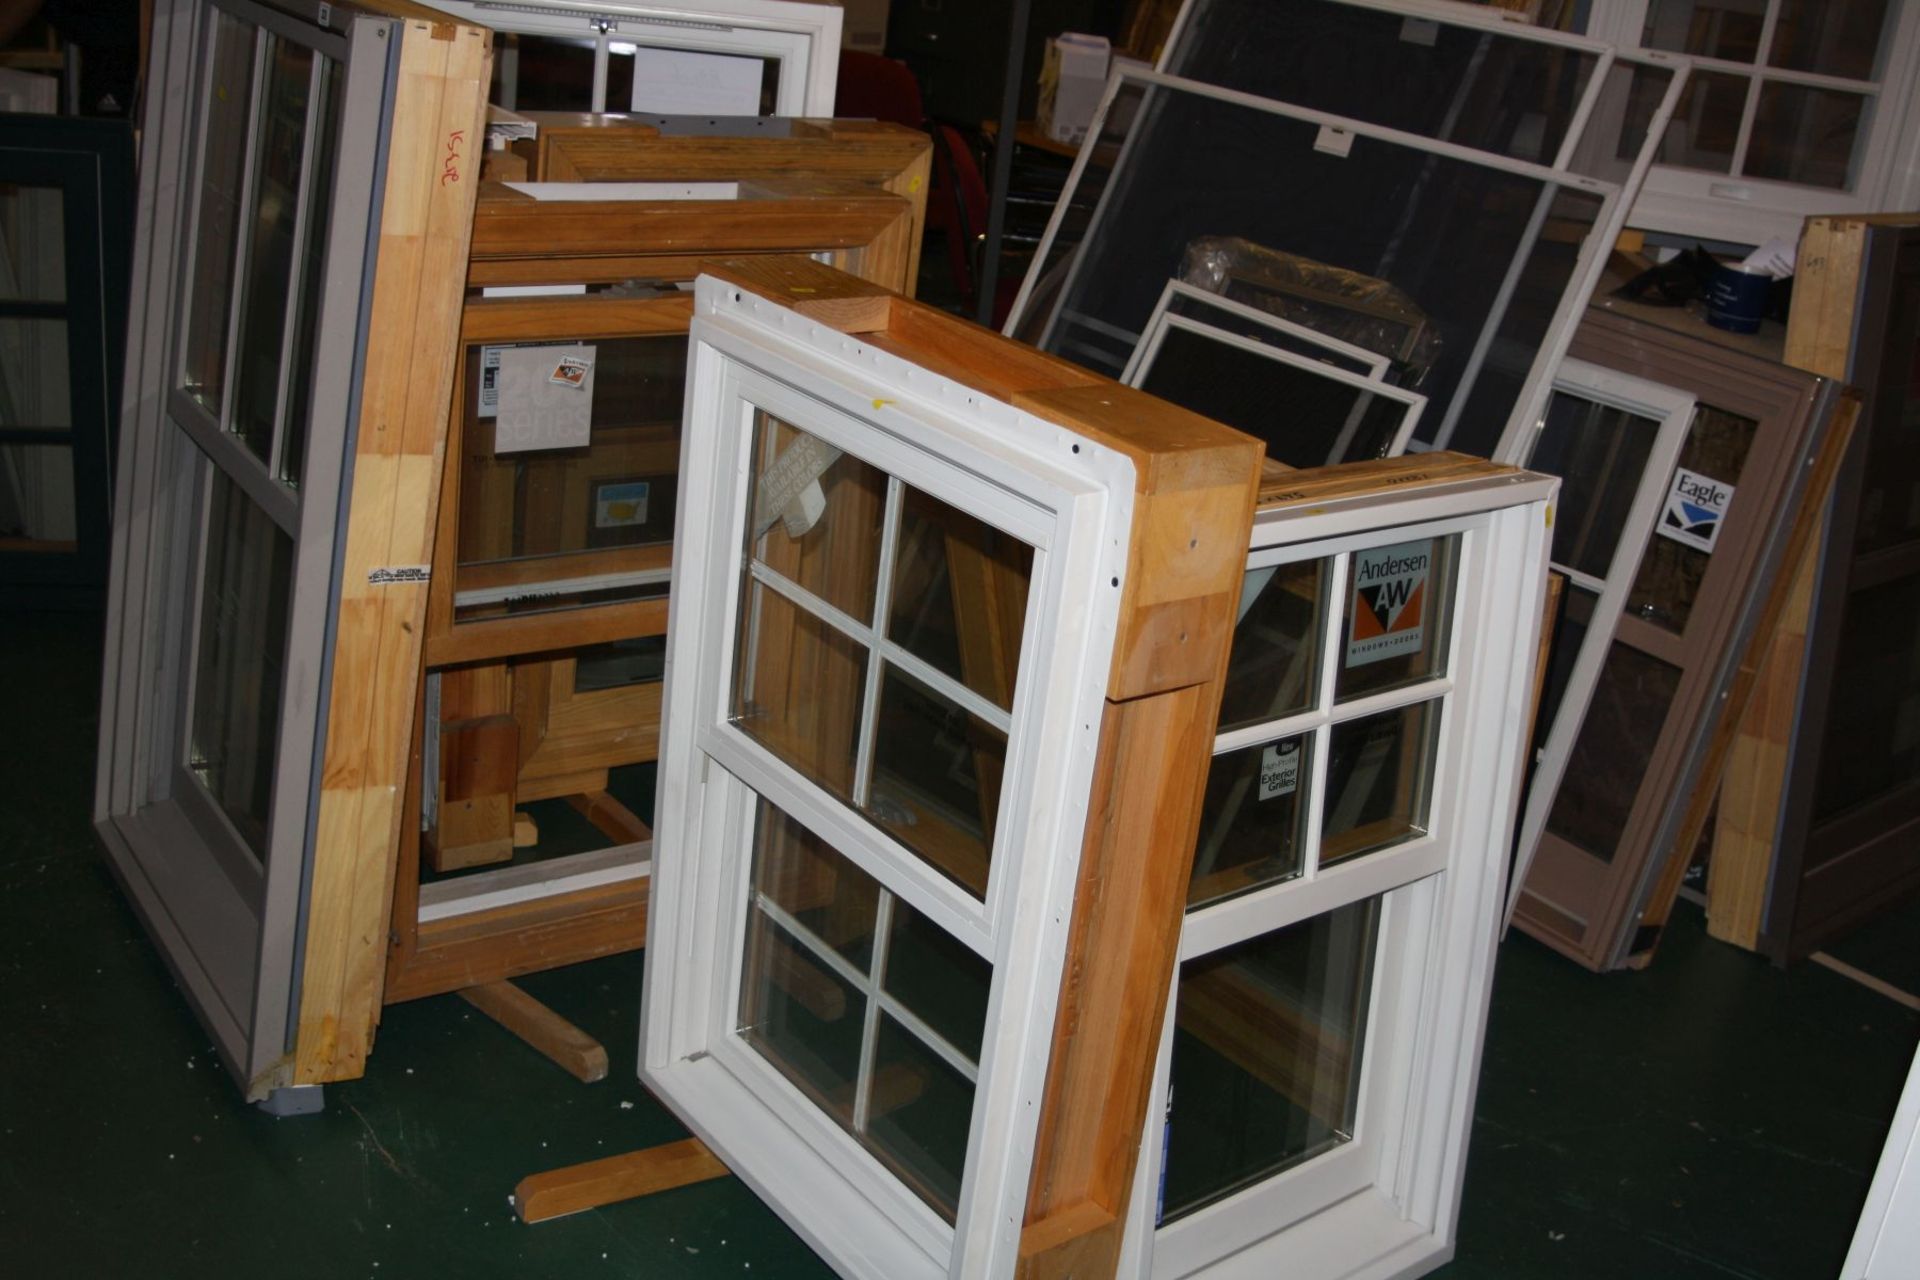 NINE DOUBLE GLAZED WINDOWS all mounted for display purposes. These include a white and pine Sash